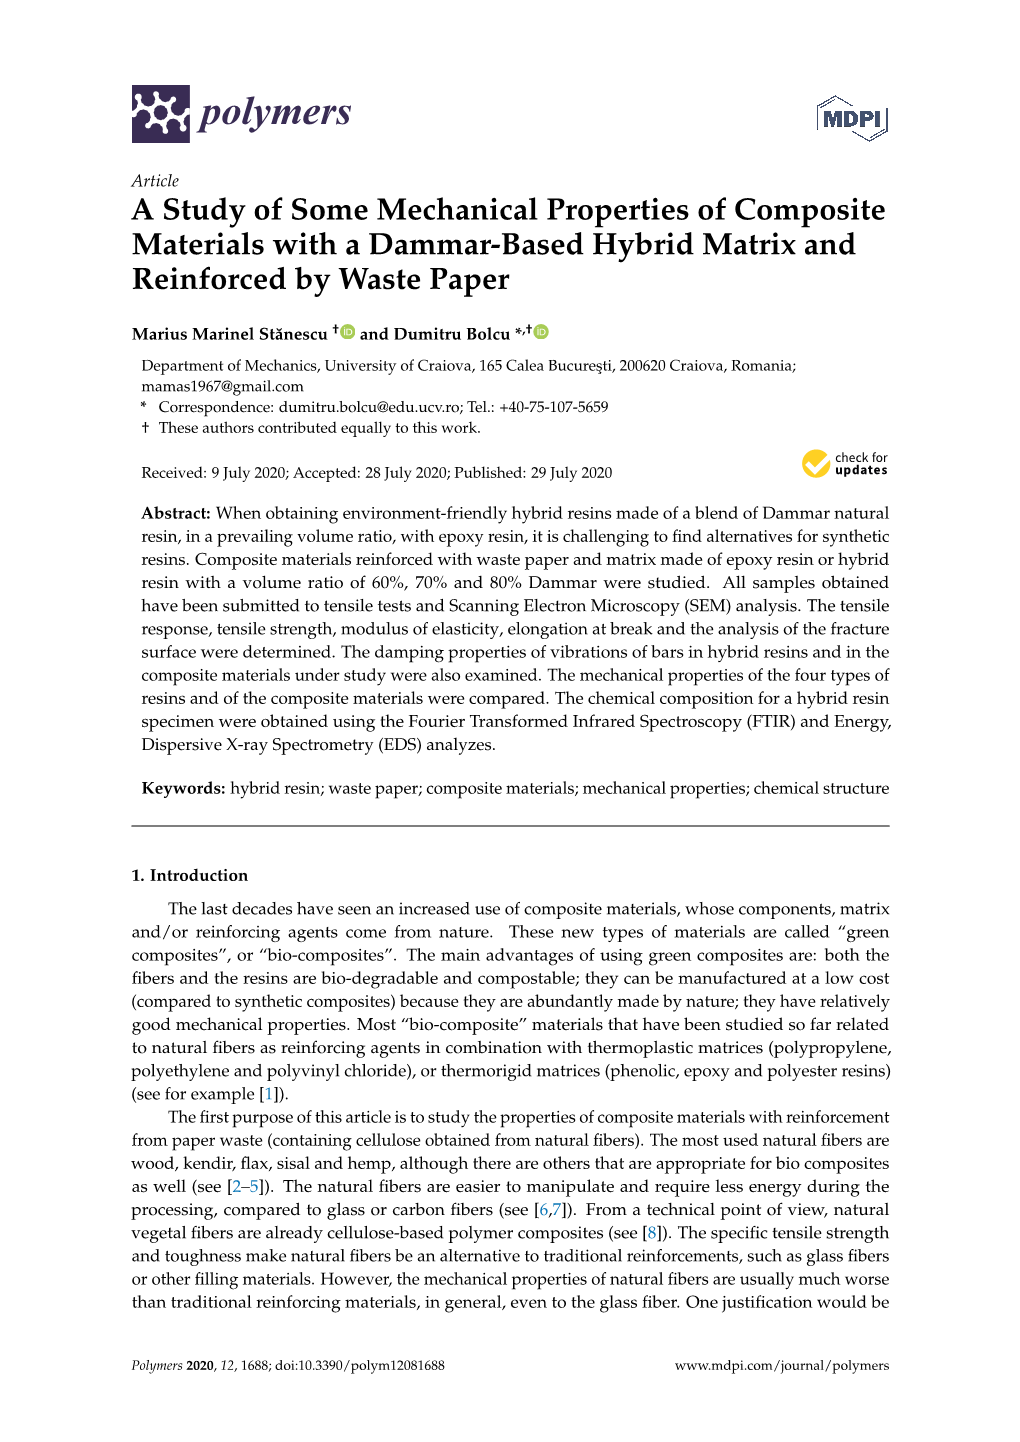 A Study of Some Mechanical Properties of Composite Materials with a Dammar-Based Hybrid Matrix and Reinforced by Waste Paper